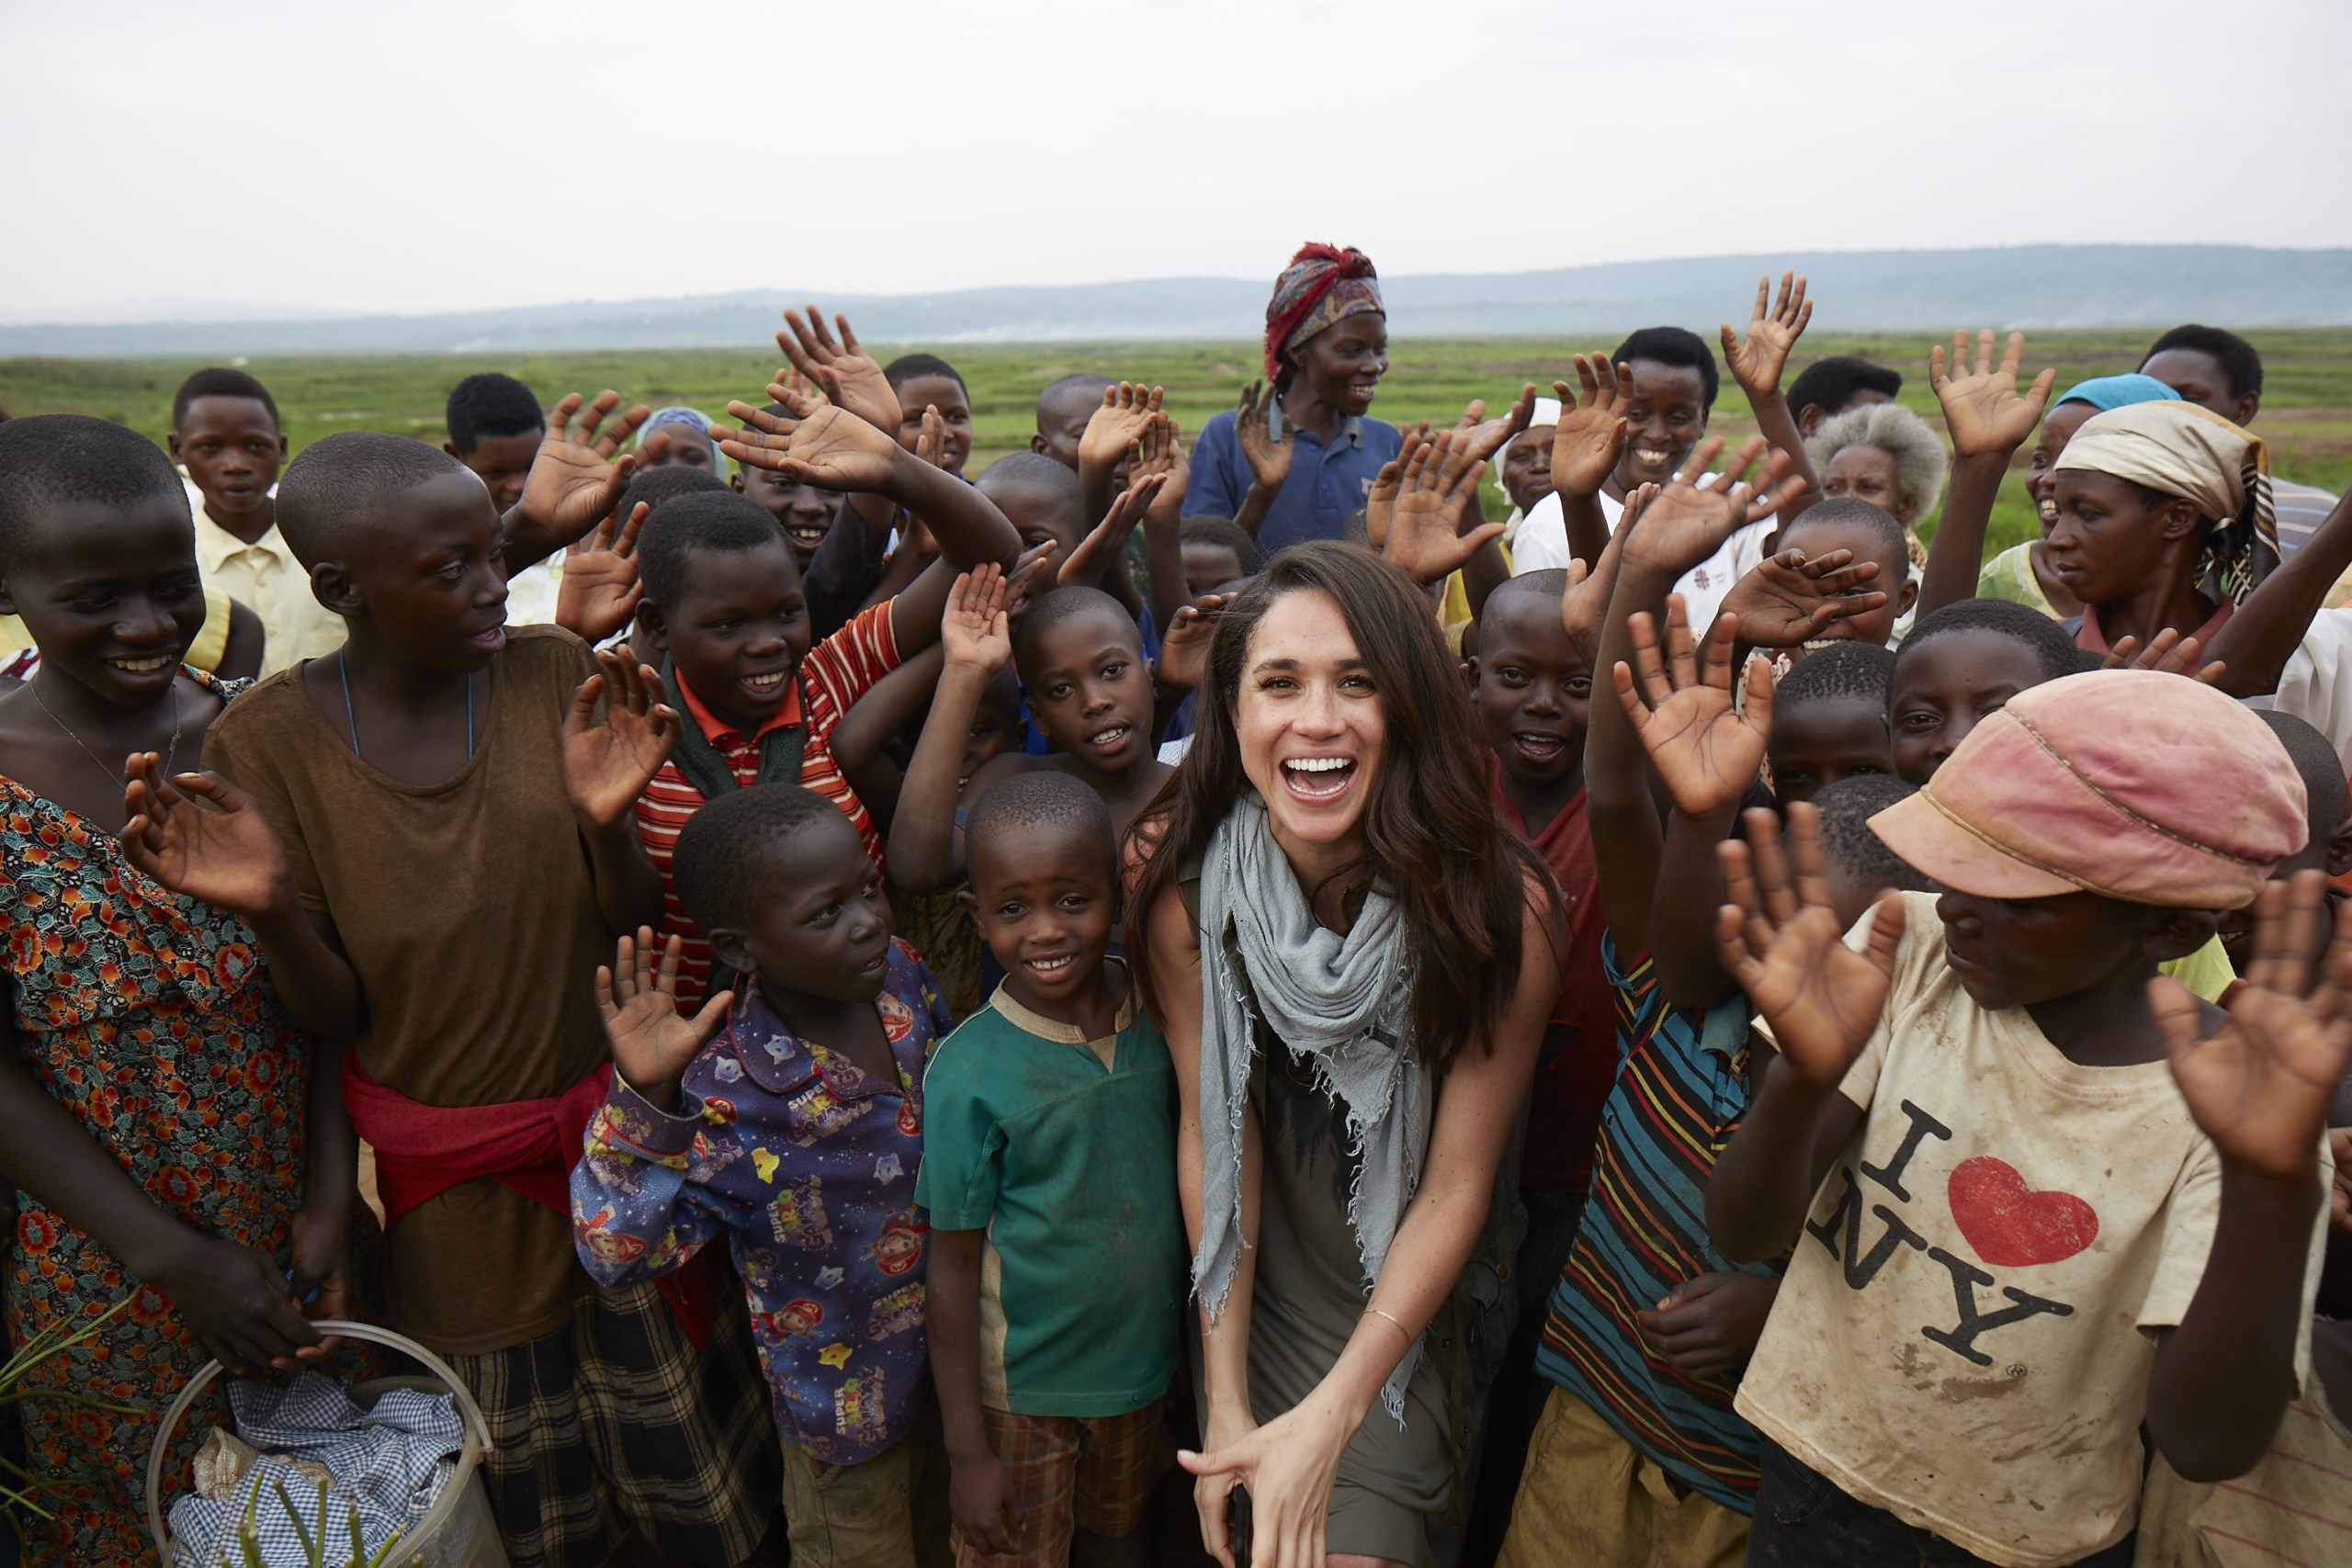 Duchess of Sussex, Meghan Markle celebrates water pump installations in Rwanda with the community